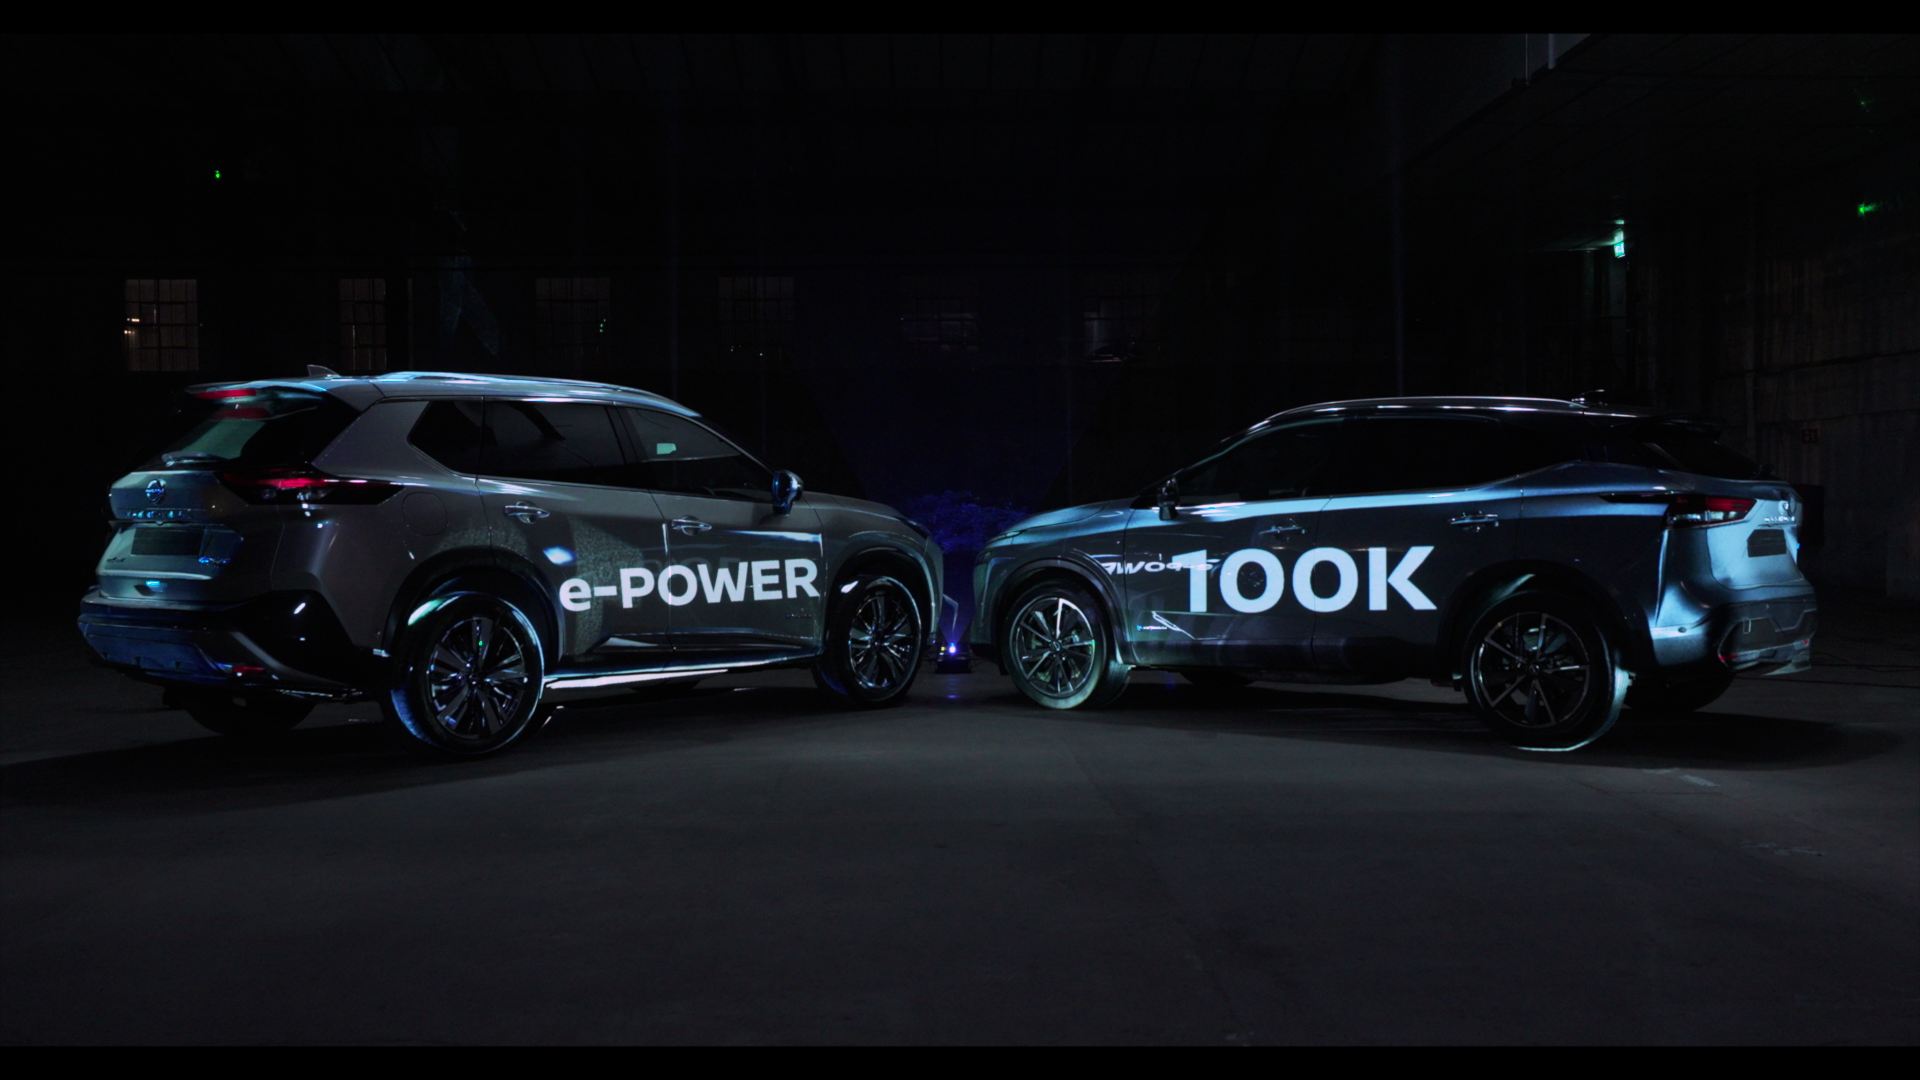 e-POWER to the people! Nissan’s unique and innovative e-POWER hits 100,000 sales in Europe